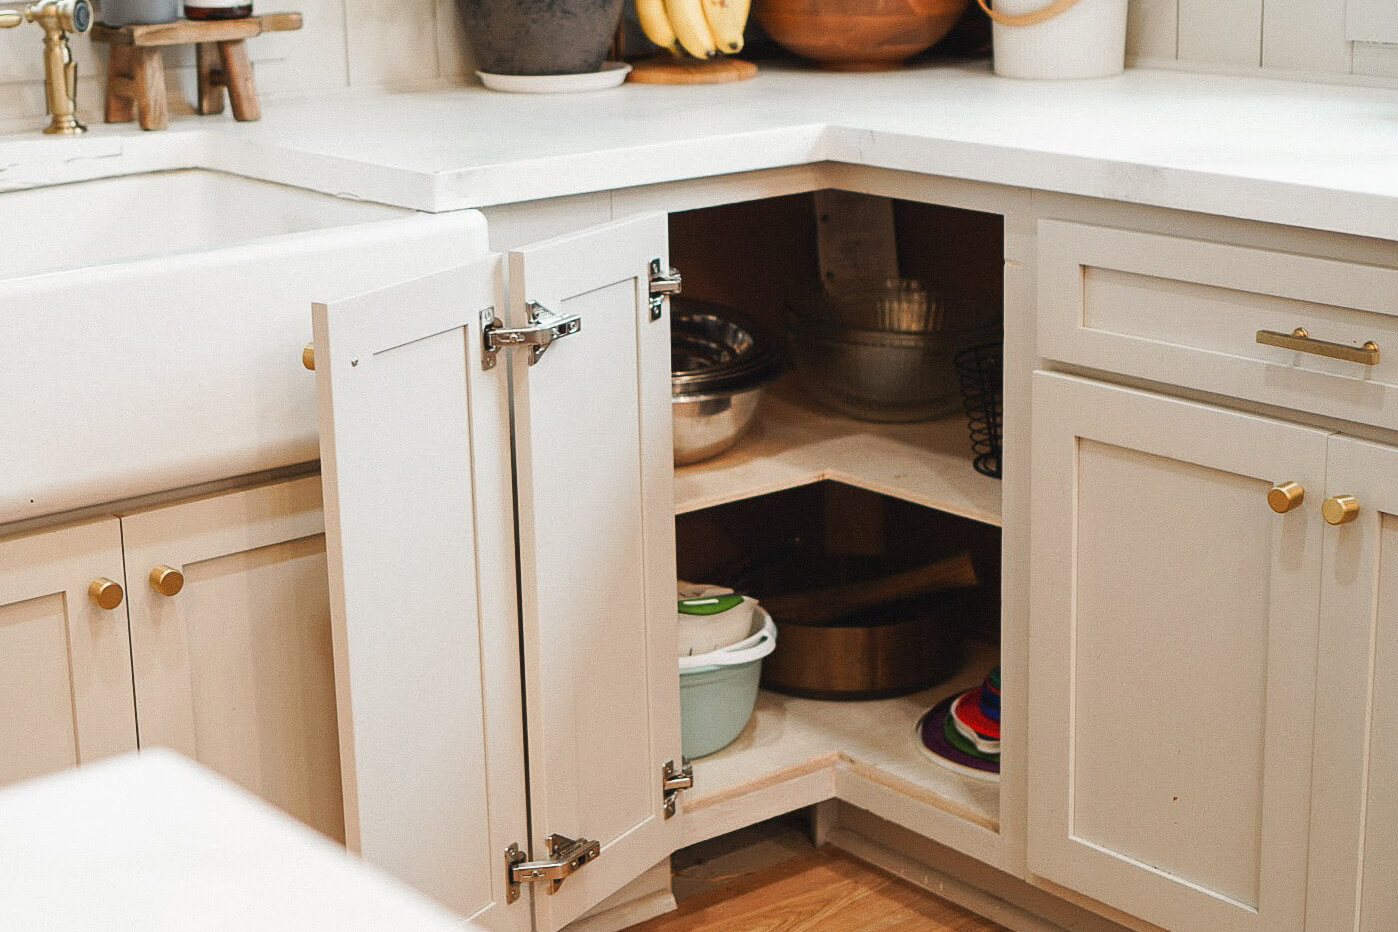 Removing a lazy susan cabinet for shelves.